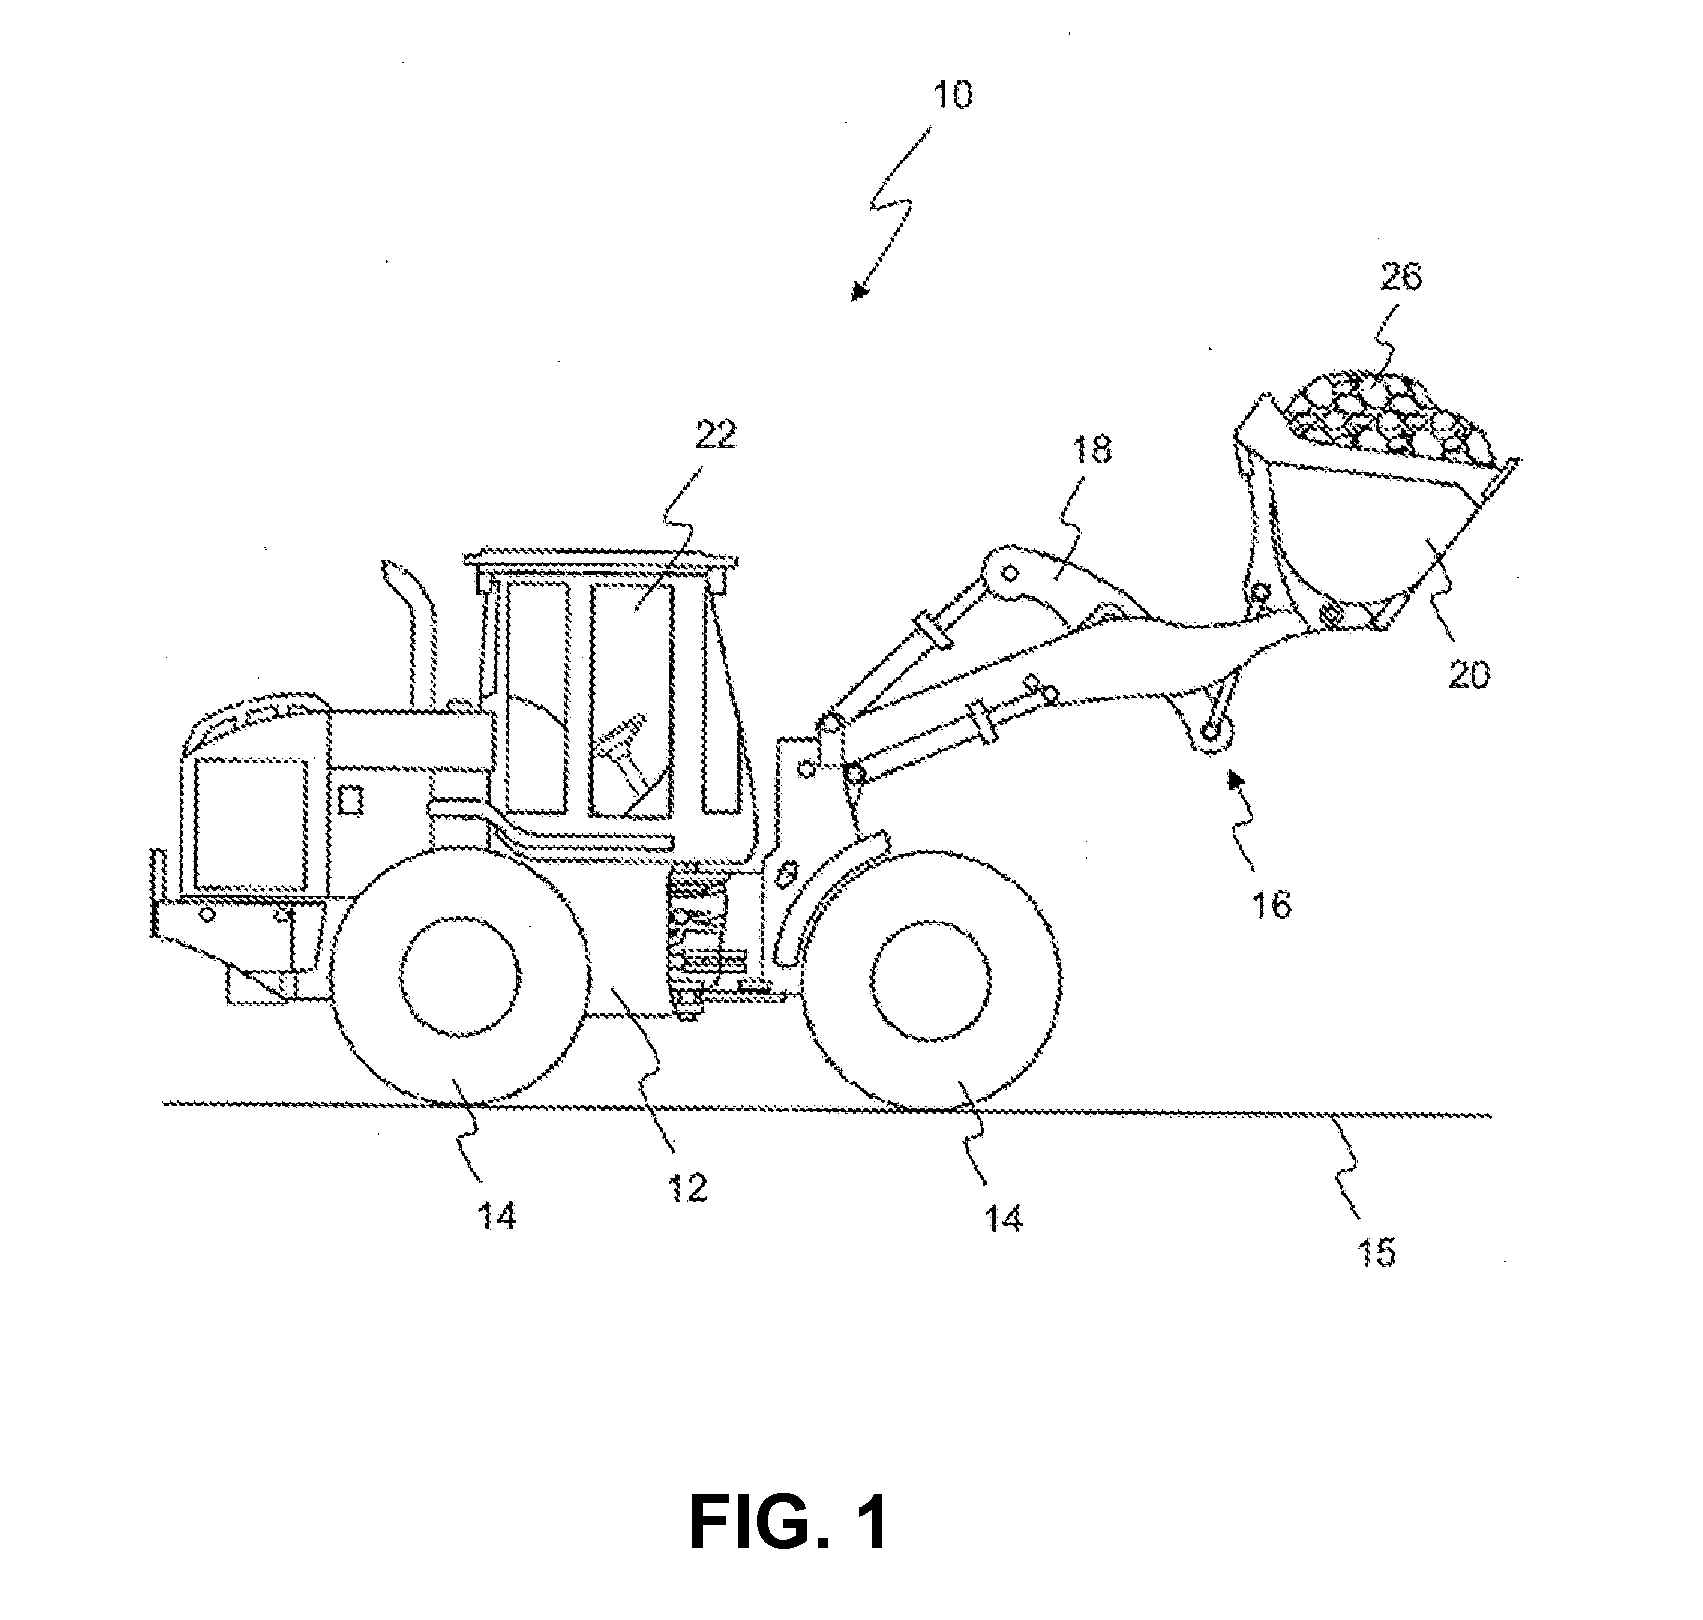 Fault detection system and method for a generator